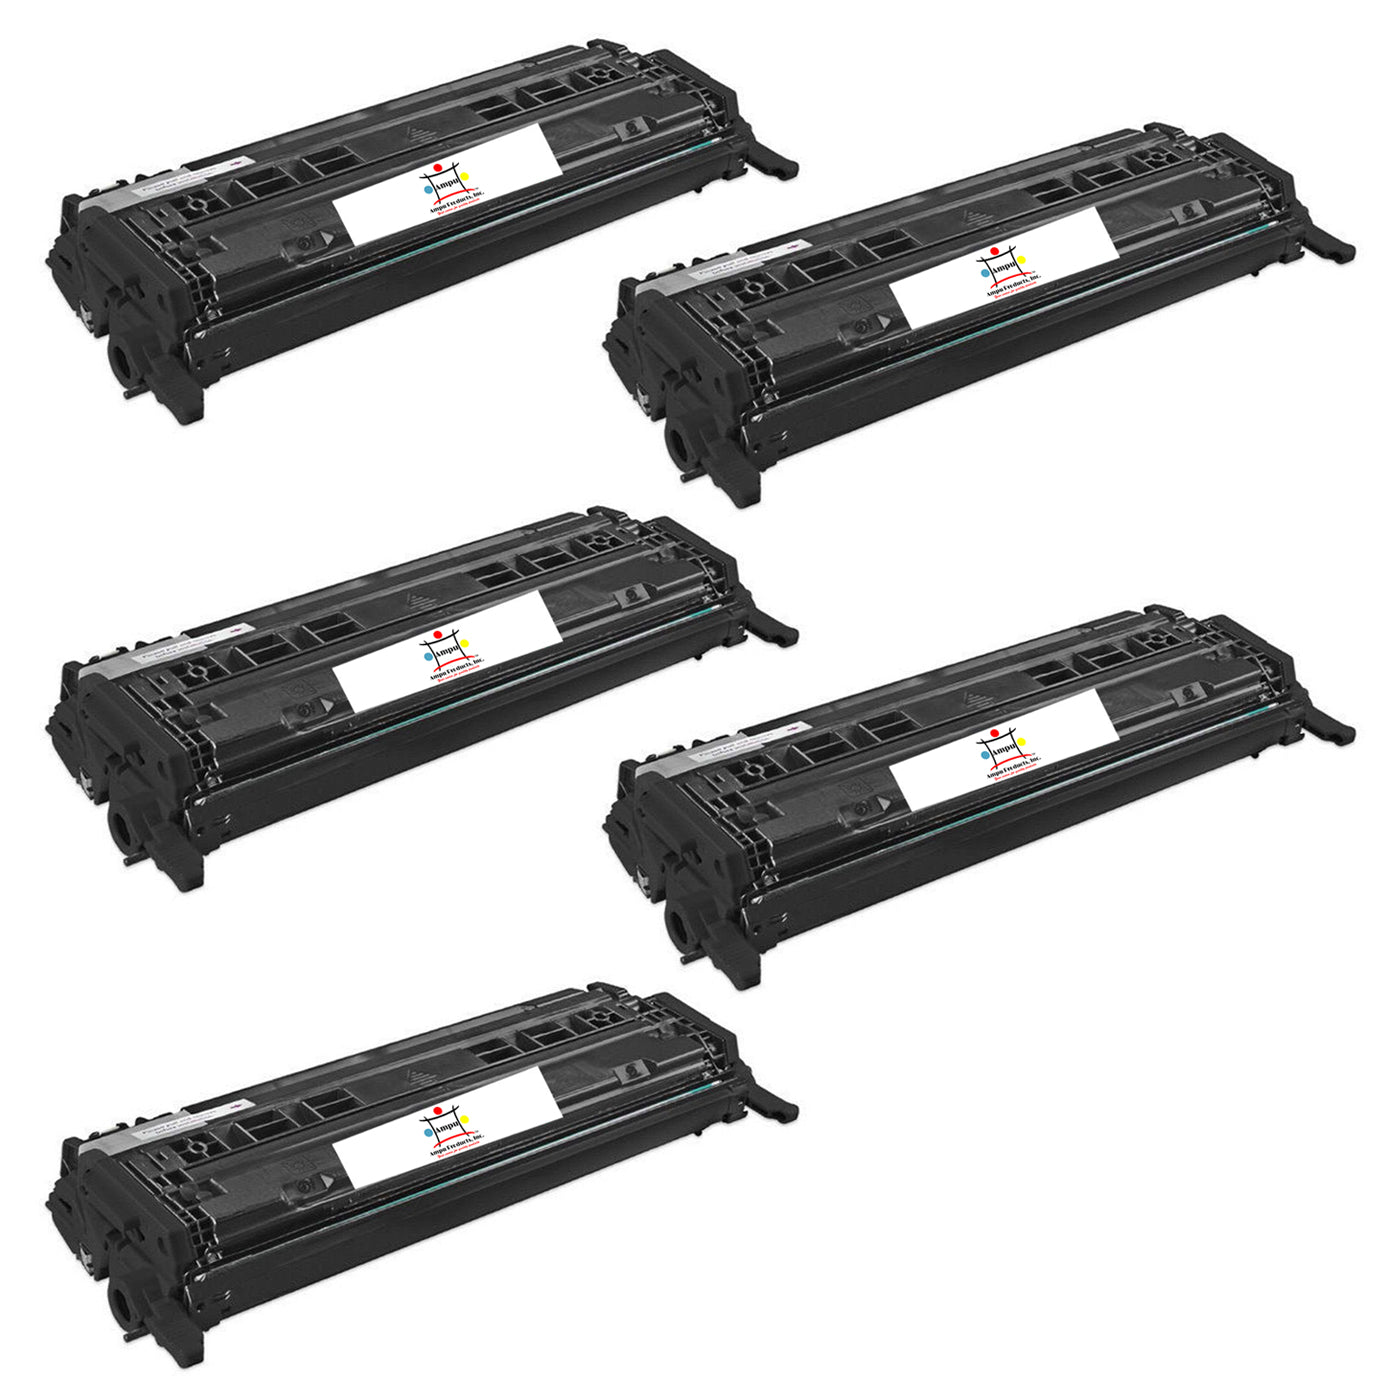 Ampuproducts Compatible Toner Cartridge Replacement for HP Q6000A (COMPATIBLE) 5 PACK